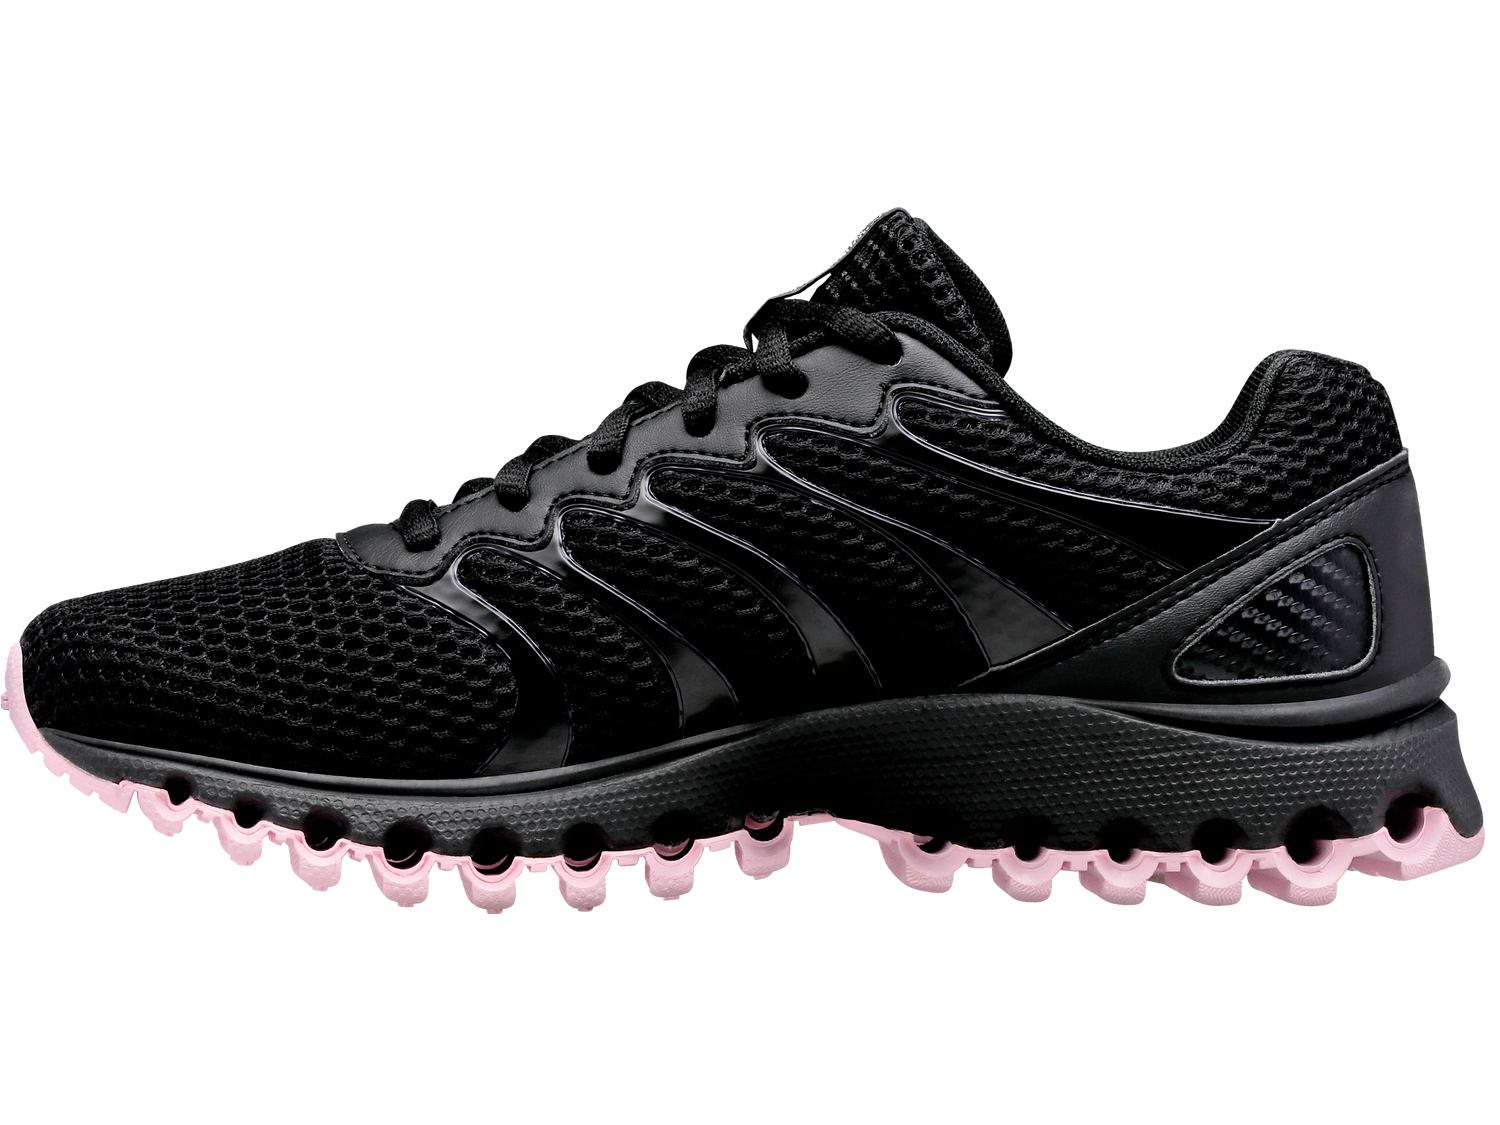 K-Swiss Women's Tubes 200 Active Shoes in Black/Cherry Blossom